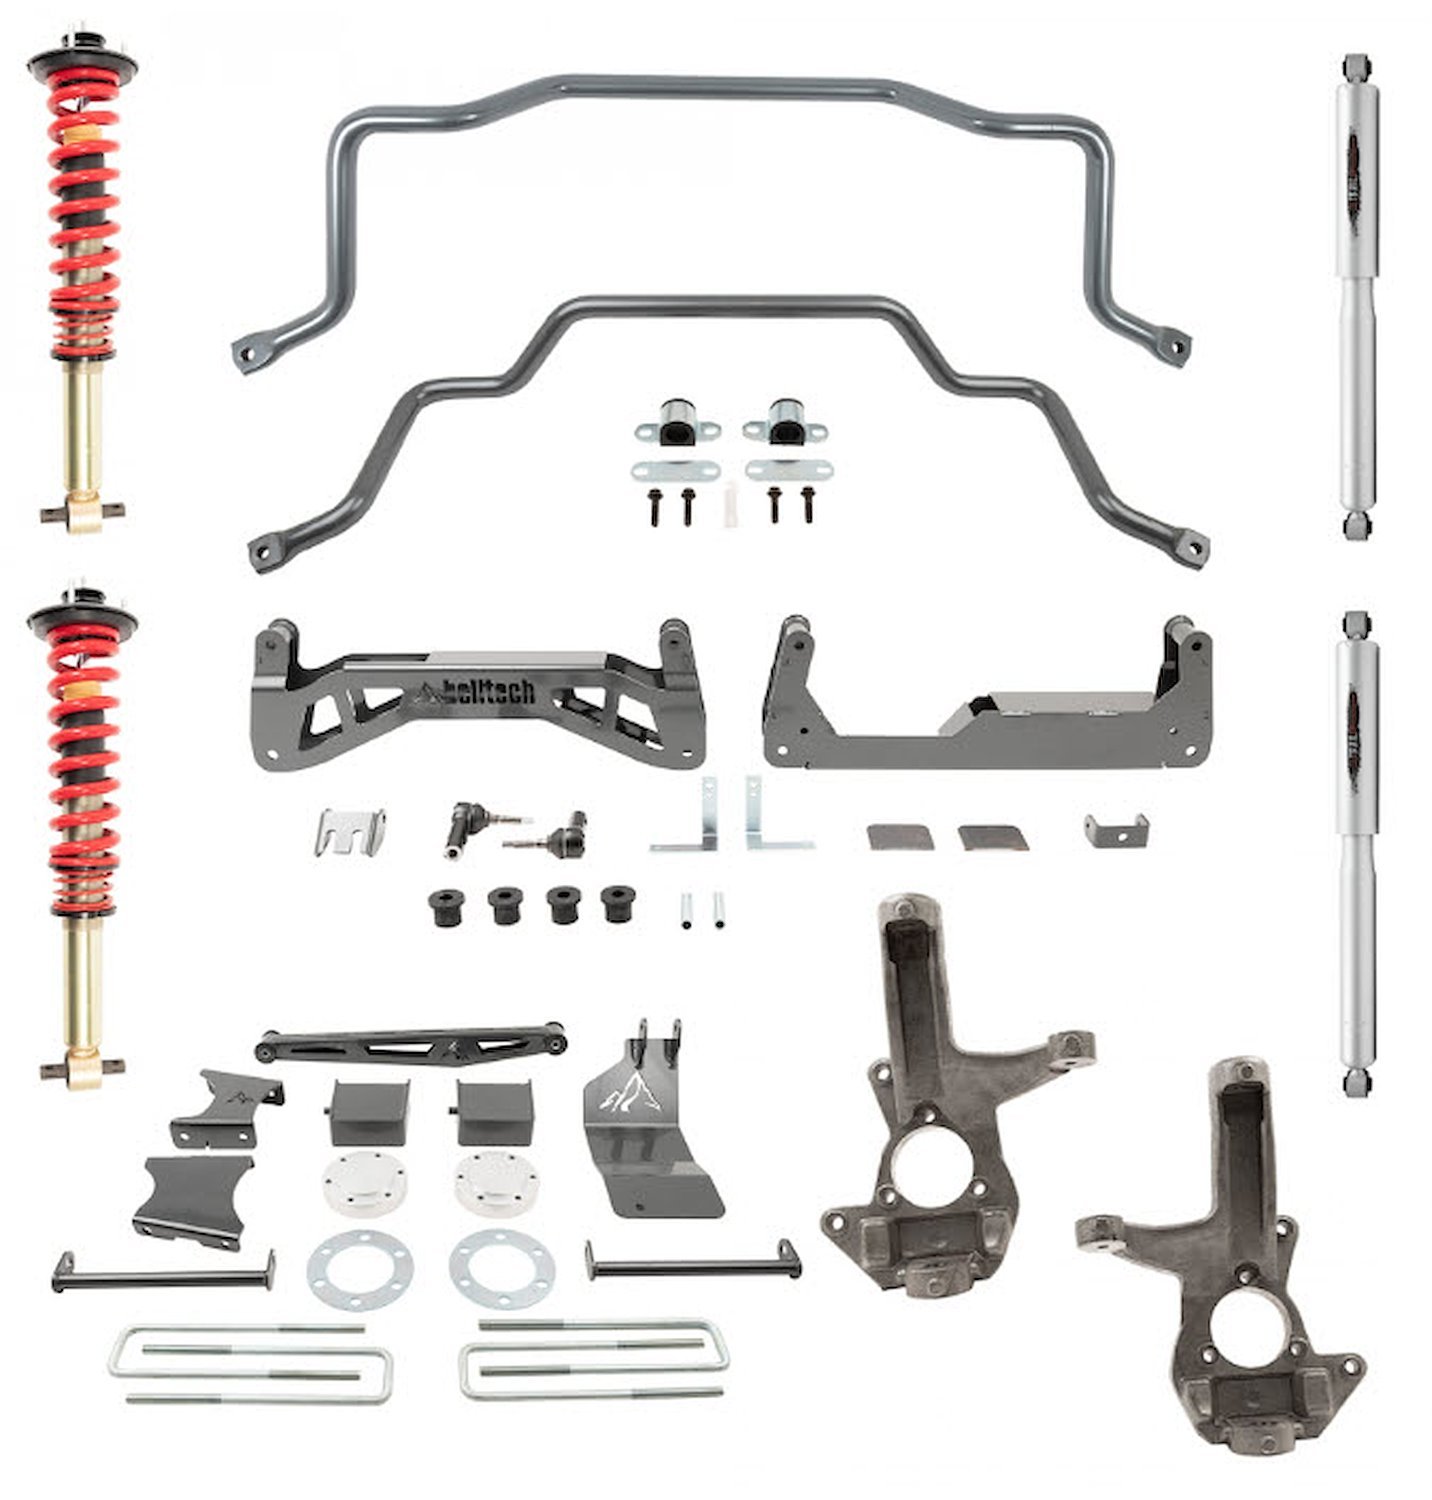 150201HK 7-9 in. Suspension Lift Kit Fits 2007-2016 GM 1500 Pickup Trucks 2WD/4WD [w/Front Coil-Overs, Rear Shocks & Sway Bars]